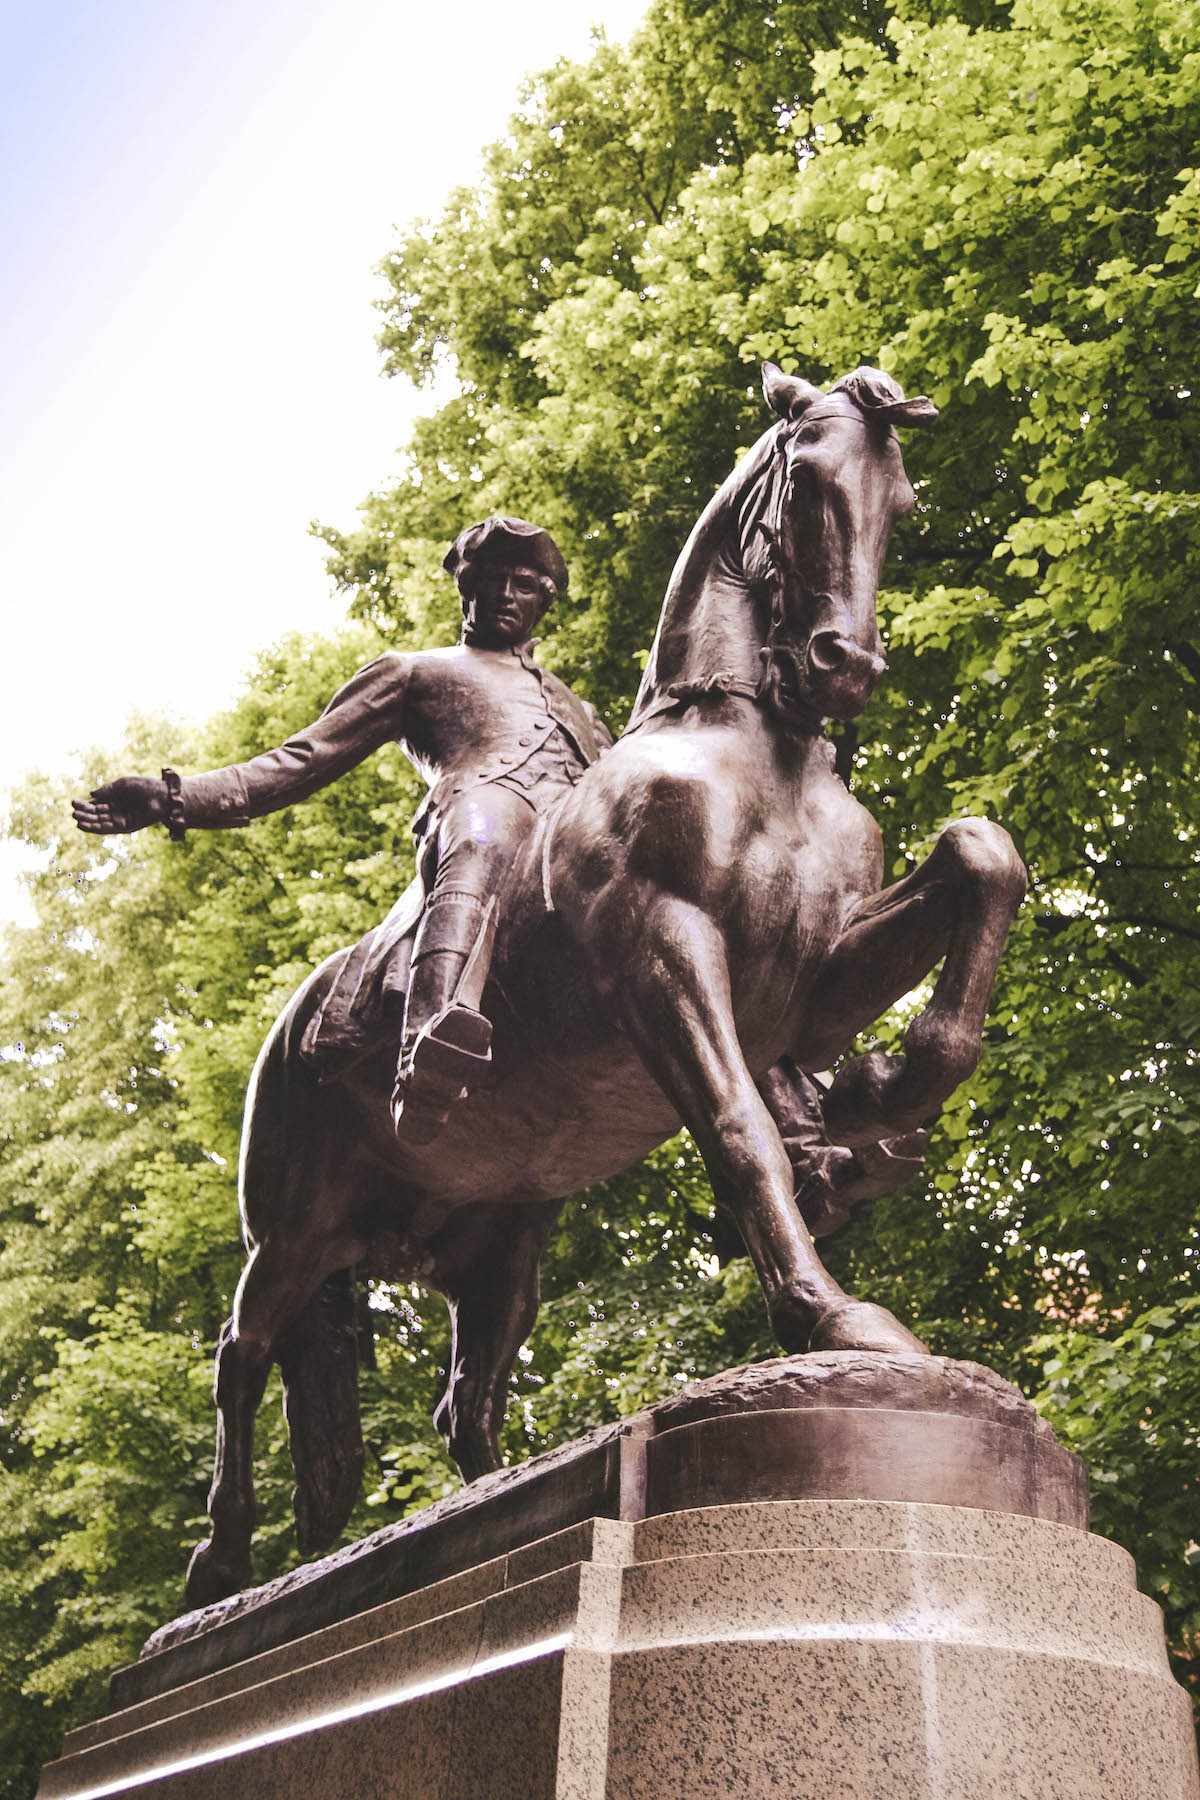 A statue of Paul Revere on his horse.